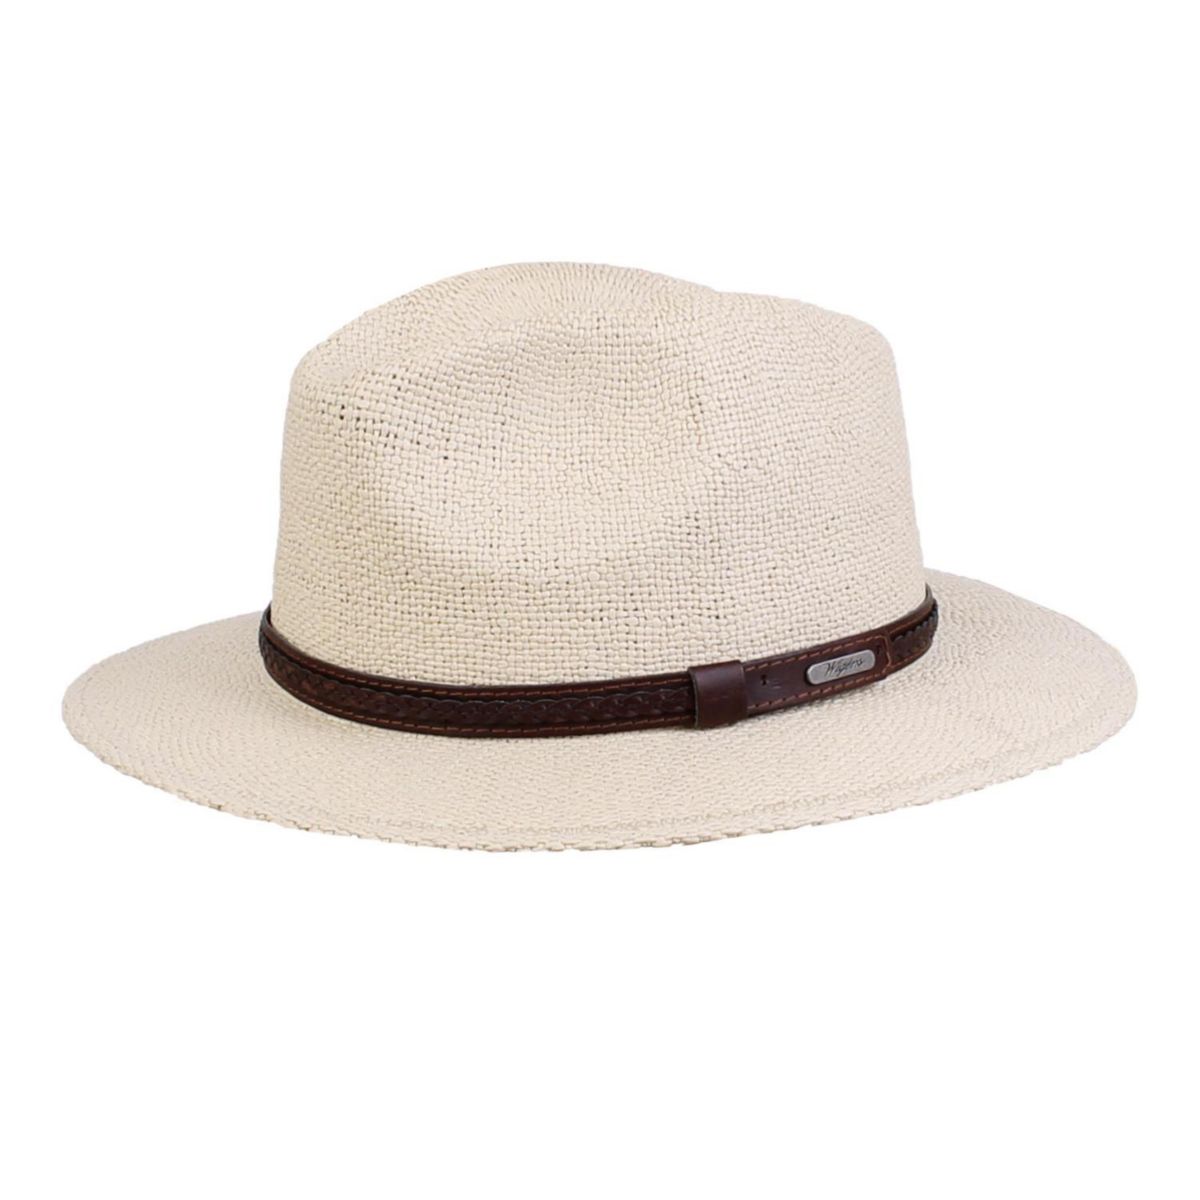 Men's Classic Wide Brim Hat With Leather Band Wigens